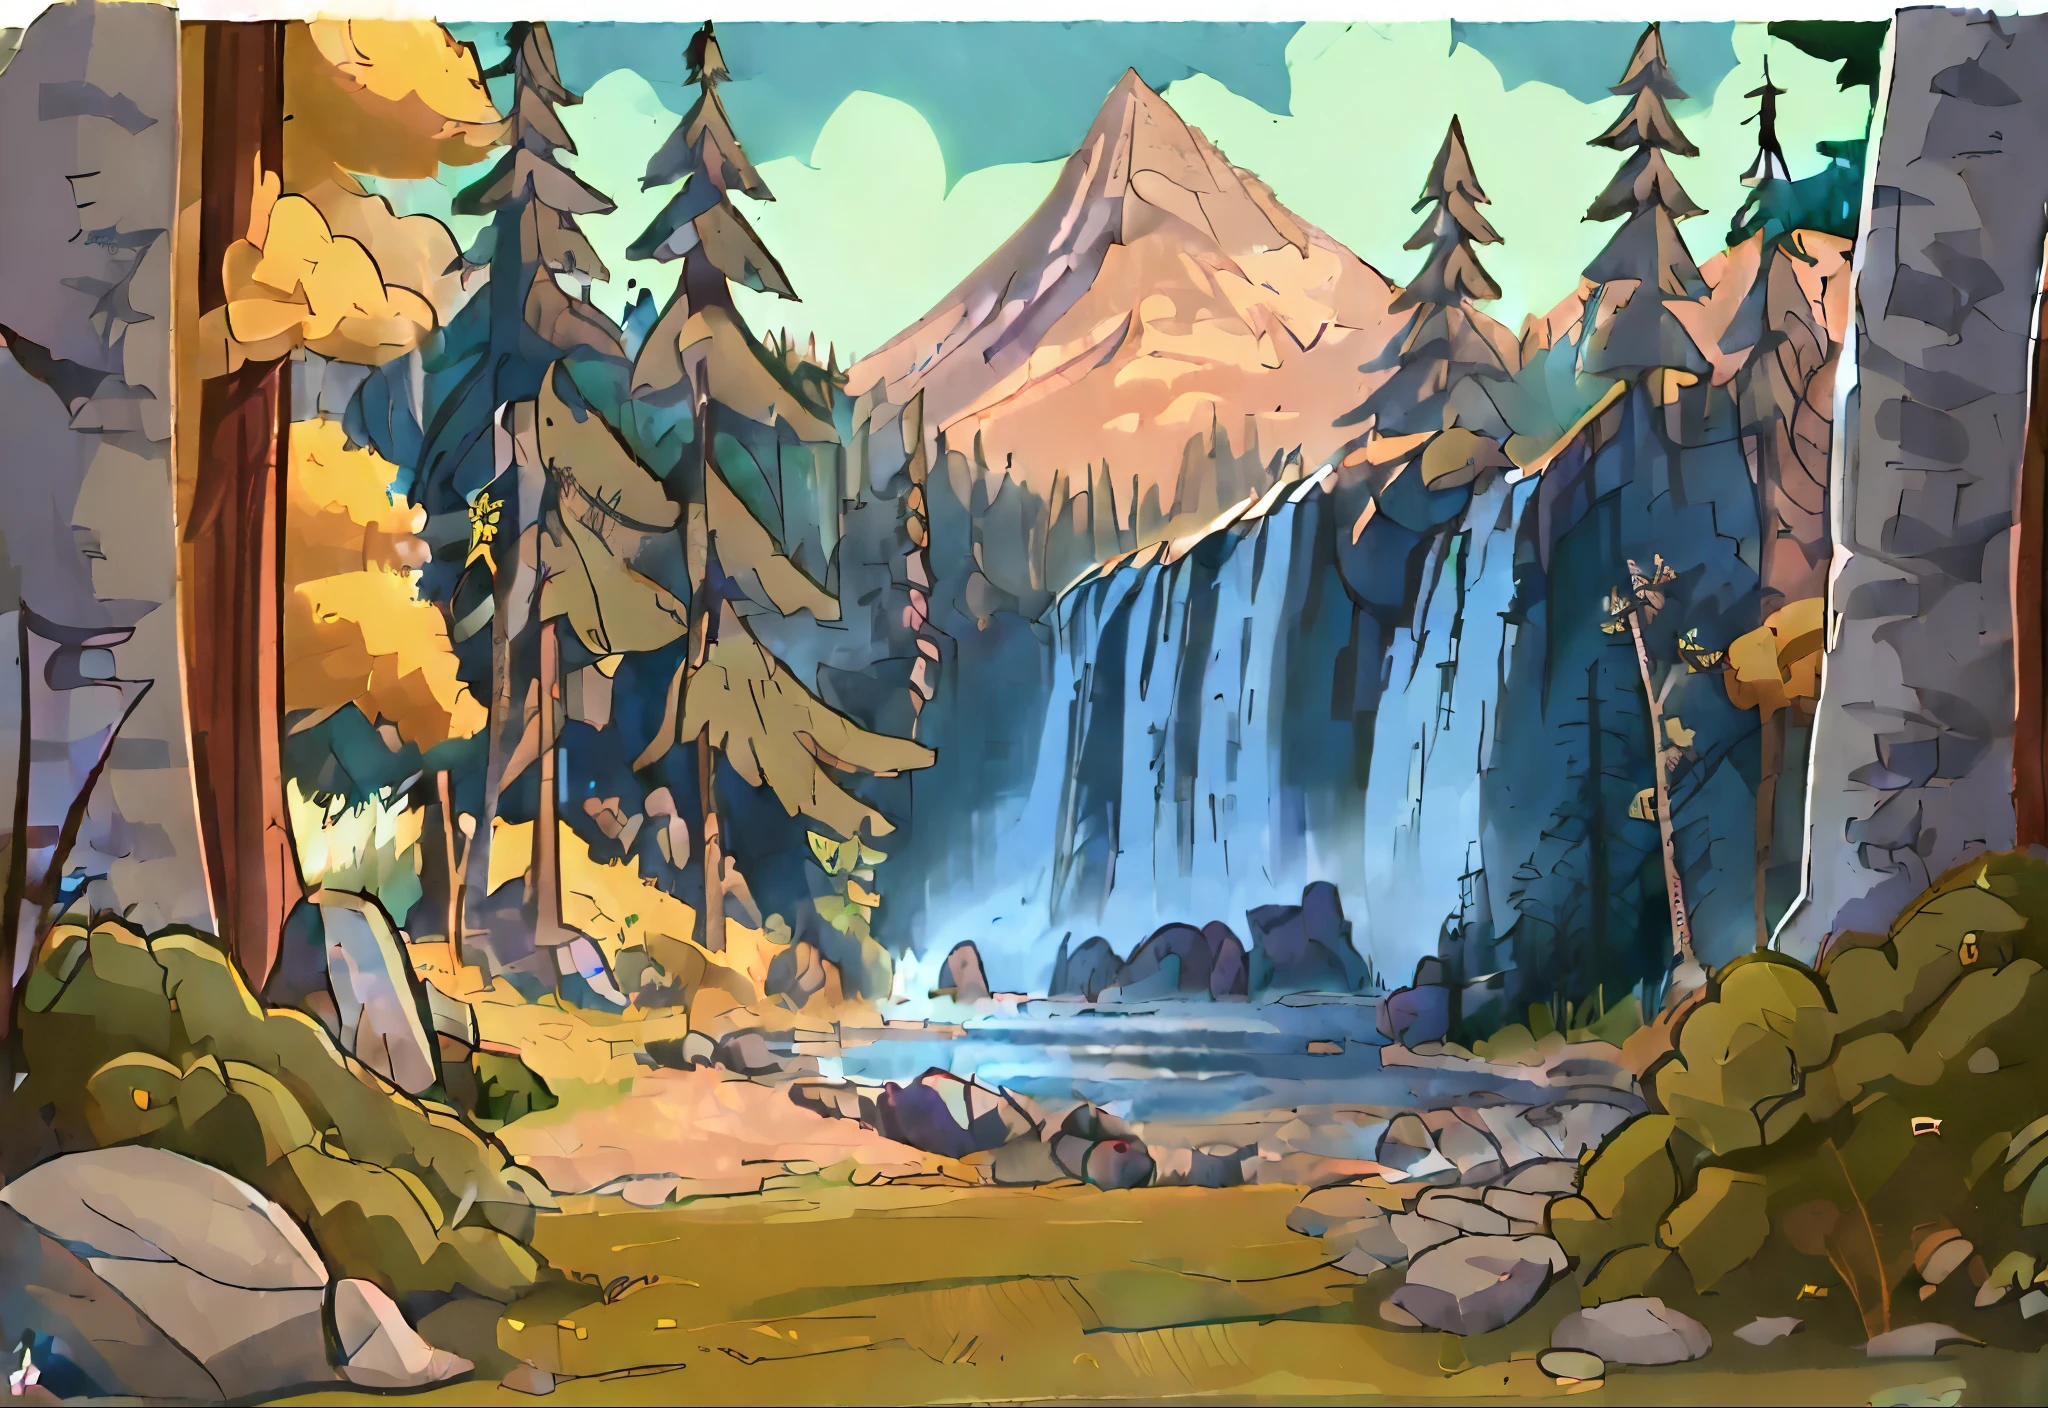 illustration of a natural landscape, Estilo Gravity Falls, cachoeira: Uma cachoeira fluida graciosamente de um penhasco rochoso, criando um lago azul cristalino abaixo. The water sparkles in the sunlight and reflects the colors of the sky and trees. The waterfall is the central and most impressive element of the image. brazi: brazi altas e verdes, possivelmente pinheiros ou abetos, circundam a cachoeira e o lago. They create a contrast with the blue of the water and sky, and add a sense of depth and perspective to the image. The trees also suggest that the scene takes place in a cold environment., mountainous region.. montanha: A snow-capped mountain rises majestically in the background under a clear blue sky. It is the farthest and tallest element in the image, and conveys a feeling of grandeur and grandeur. The mountain also indicates that the scene takes place at high altitude and that the waterfall is fed by meltwater... rochas: Large rocks are scattered across the foreground and edge of the lake... They are gray and brown in color, and have irregular and angular shapes. Create a contrast with the softness and fluidity of water, and add a sense of texture and realism to the image. Rocks also serve as points of interest and balance in the image composition...